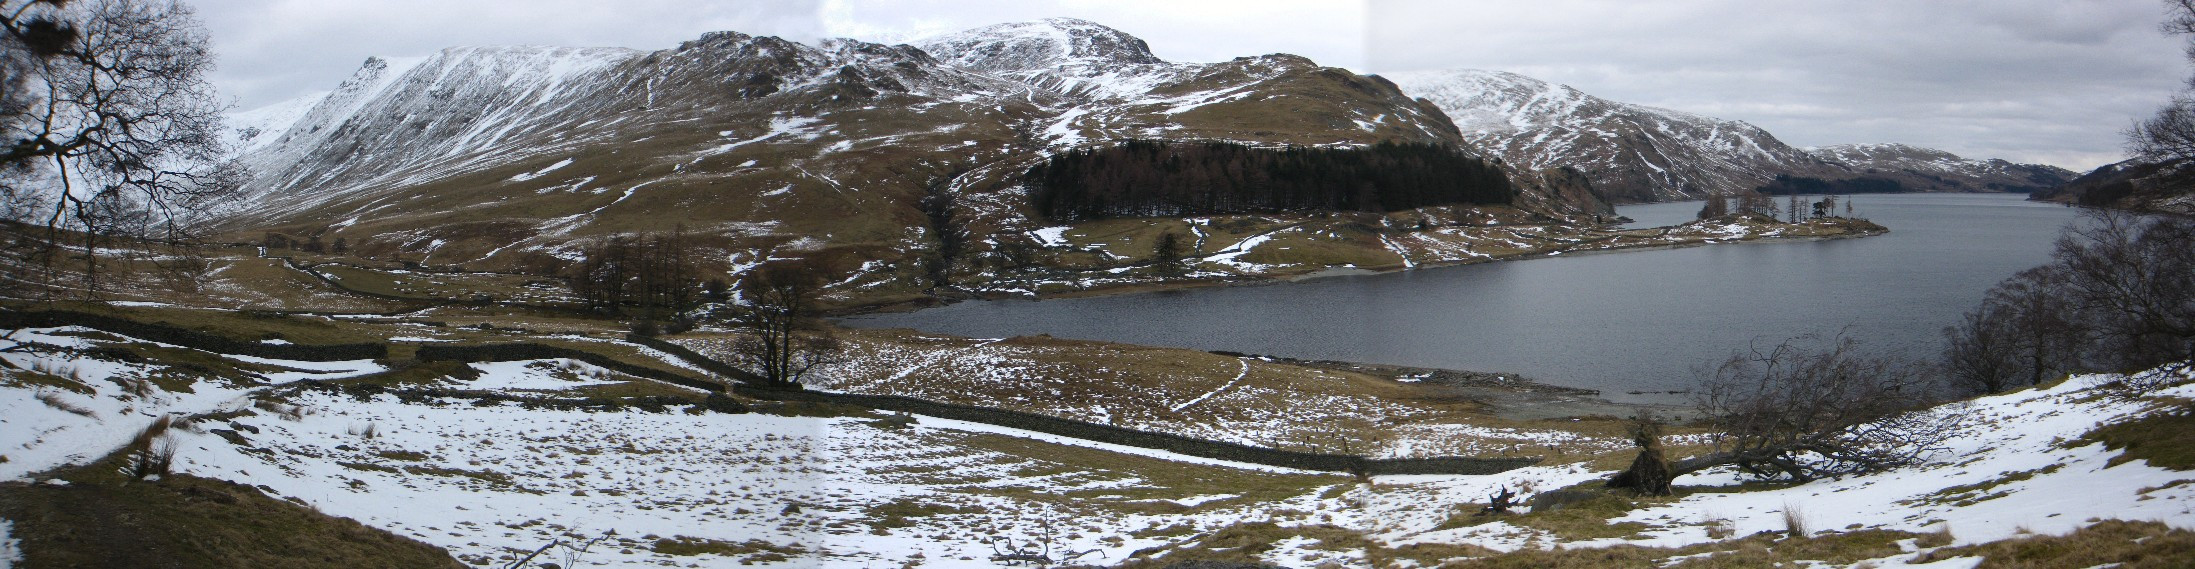 Panorama of Kidsty Pike and the view down Haweswater